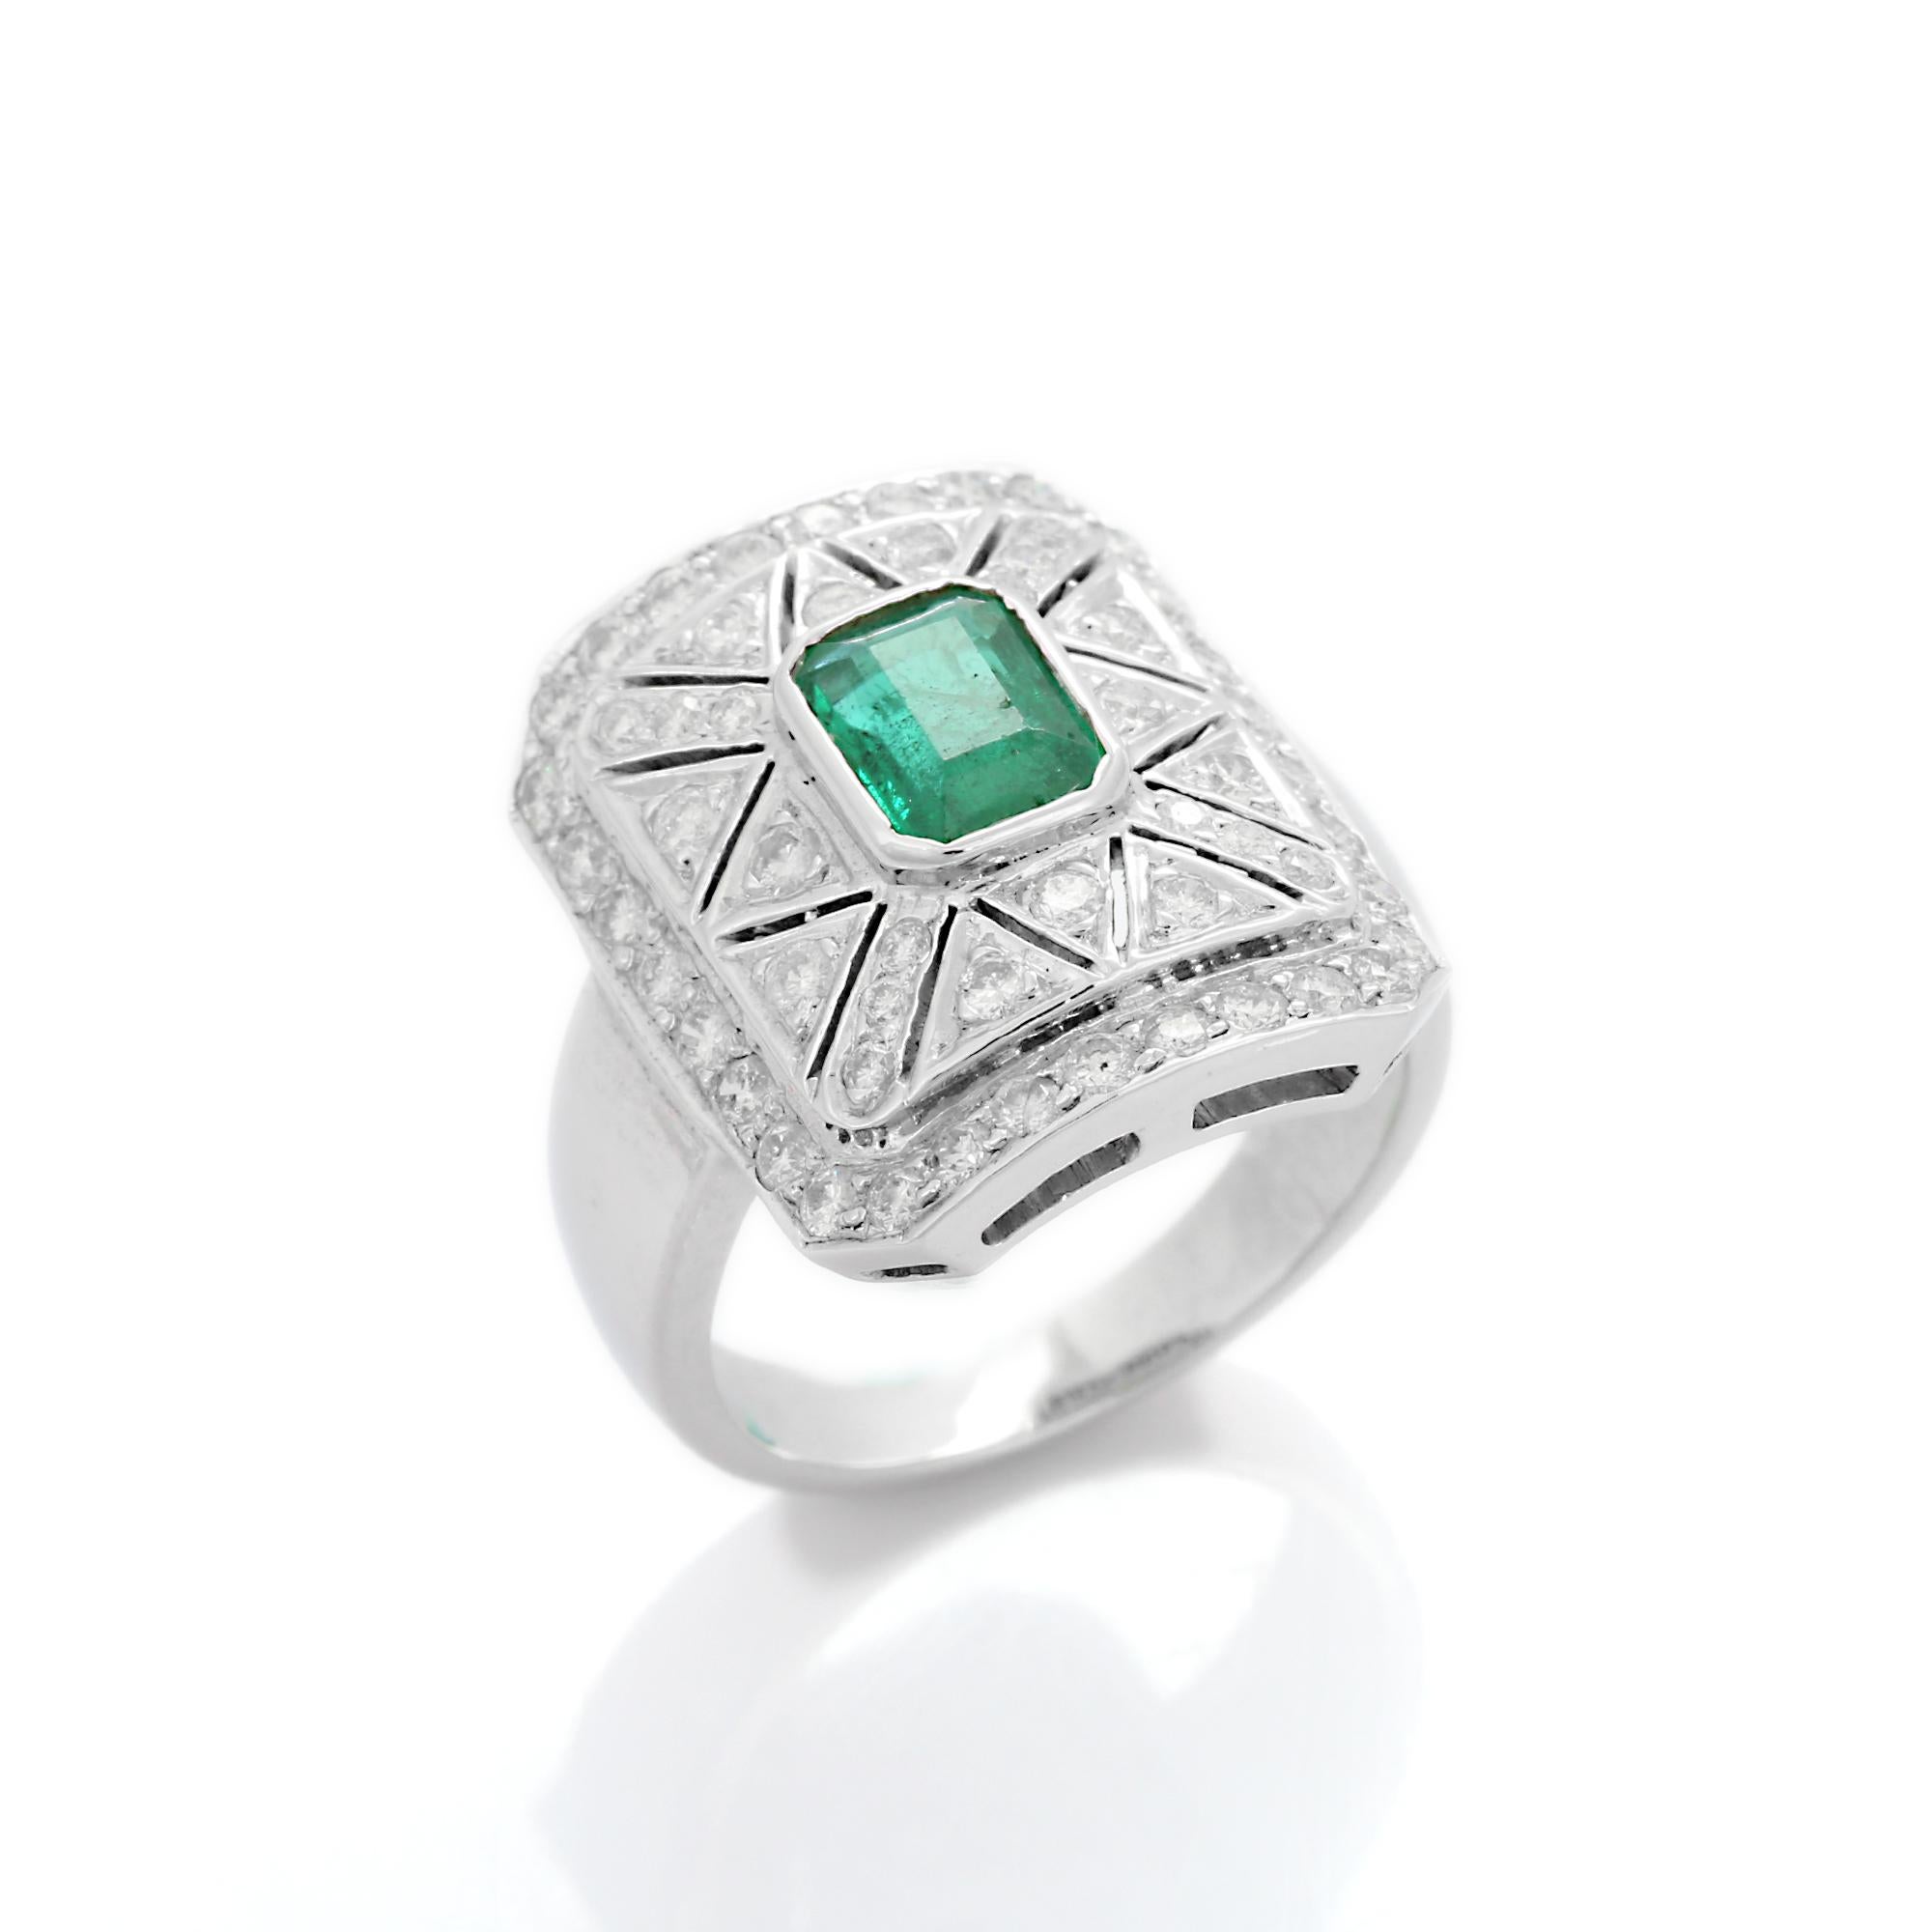 For Sale:  18K White Gold Emerald and Diamond Wedding Ring 7